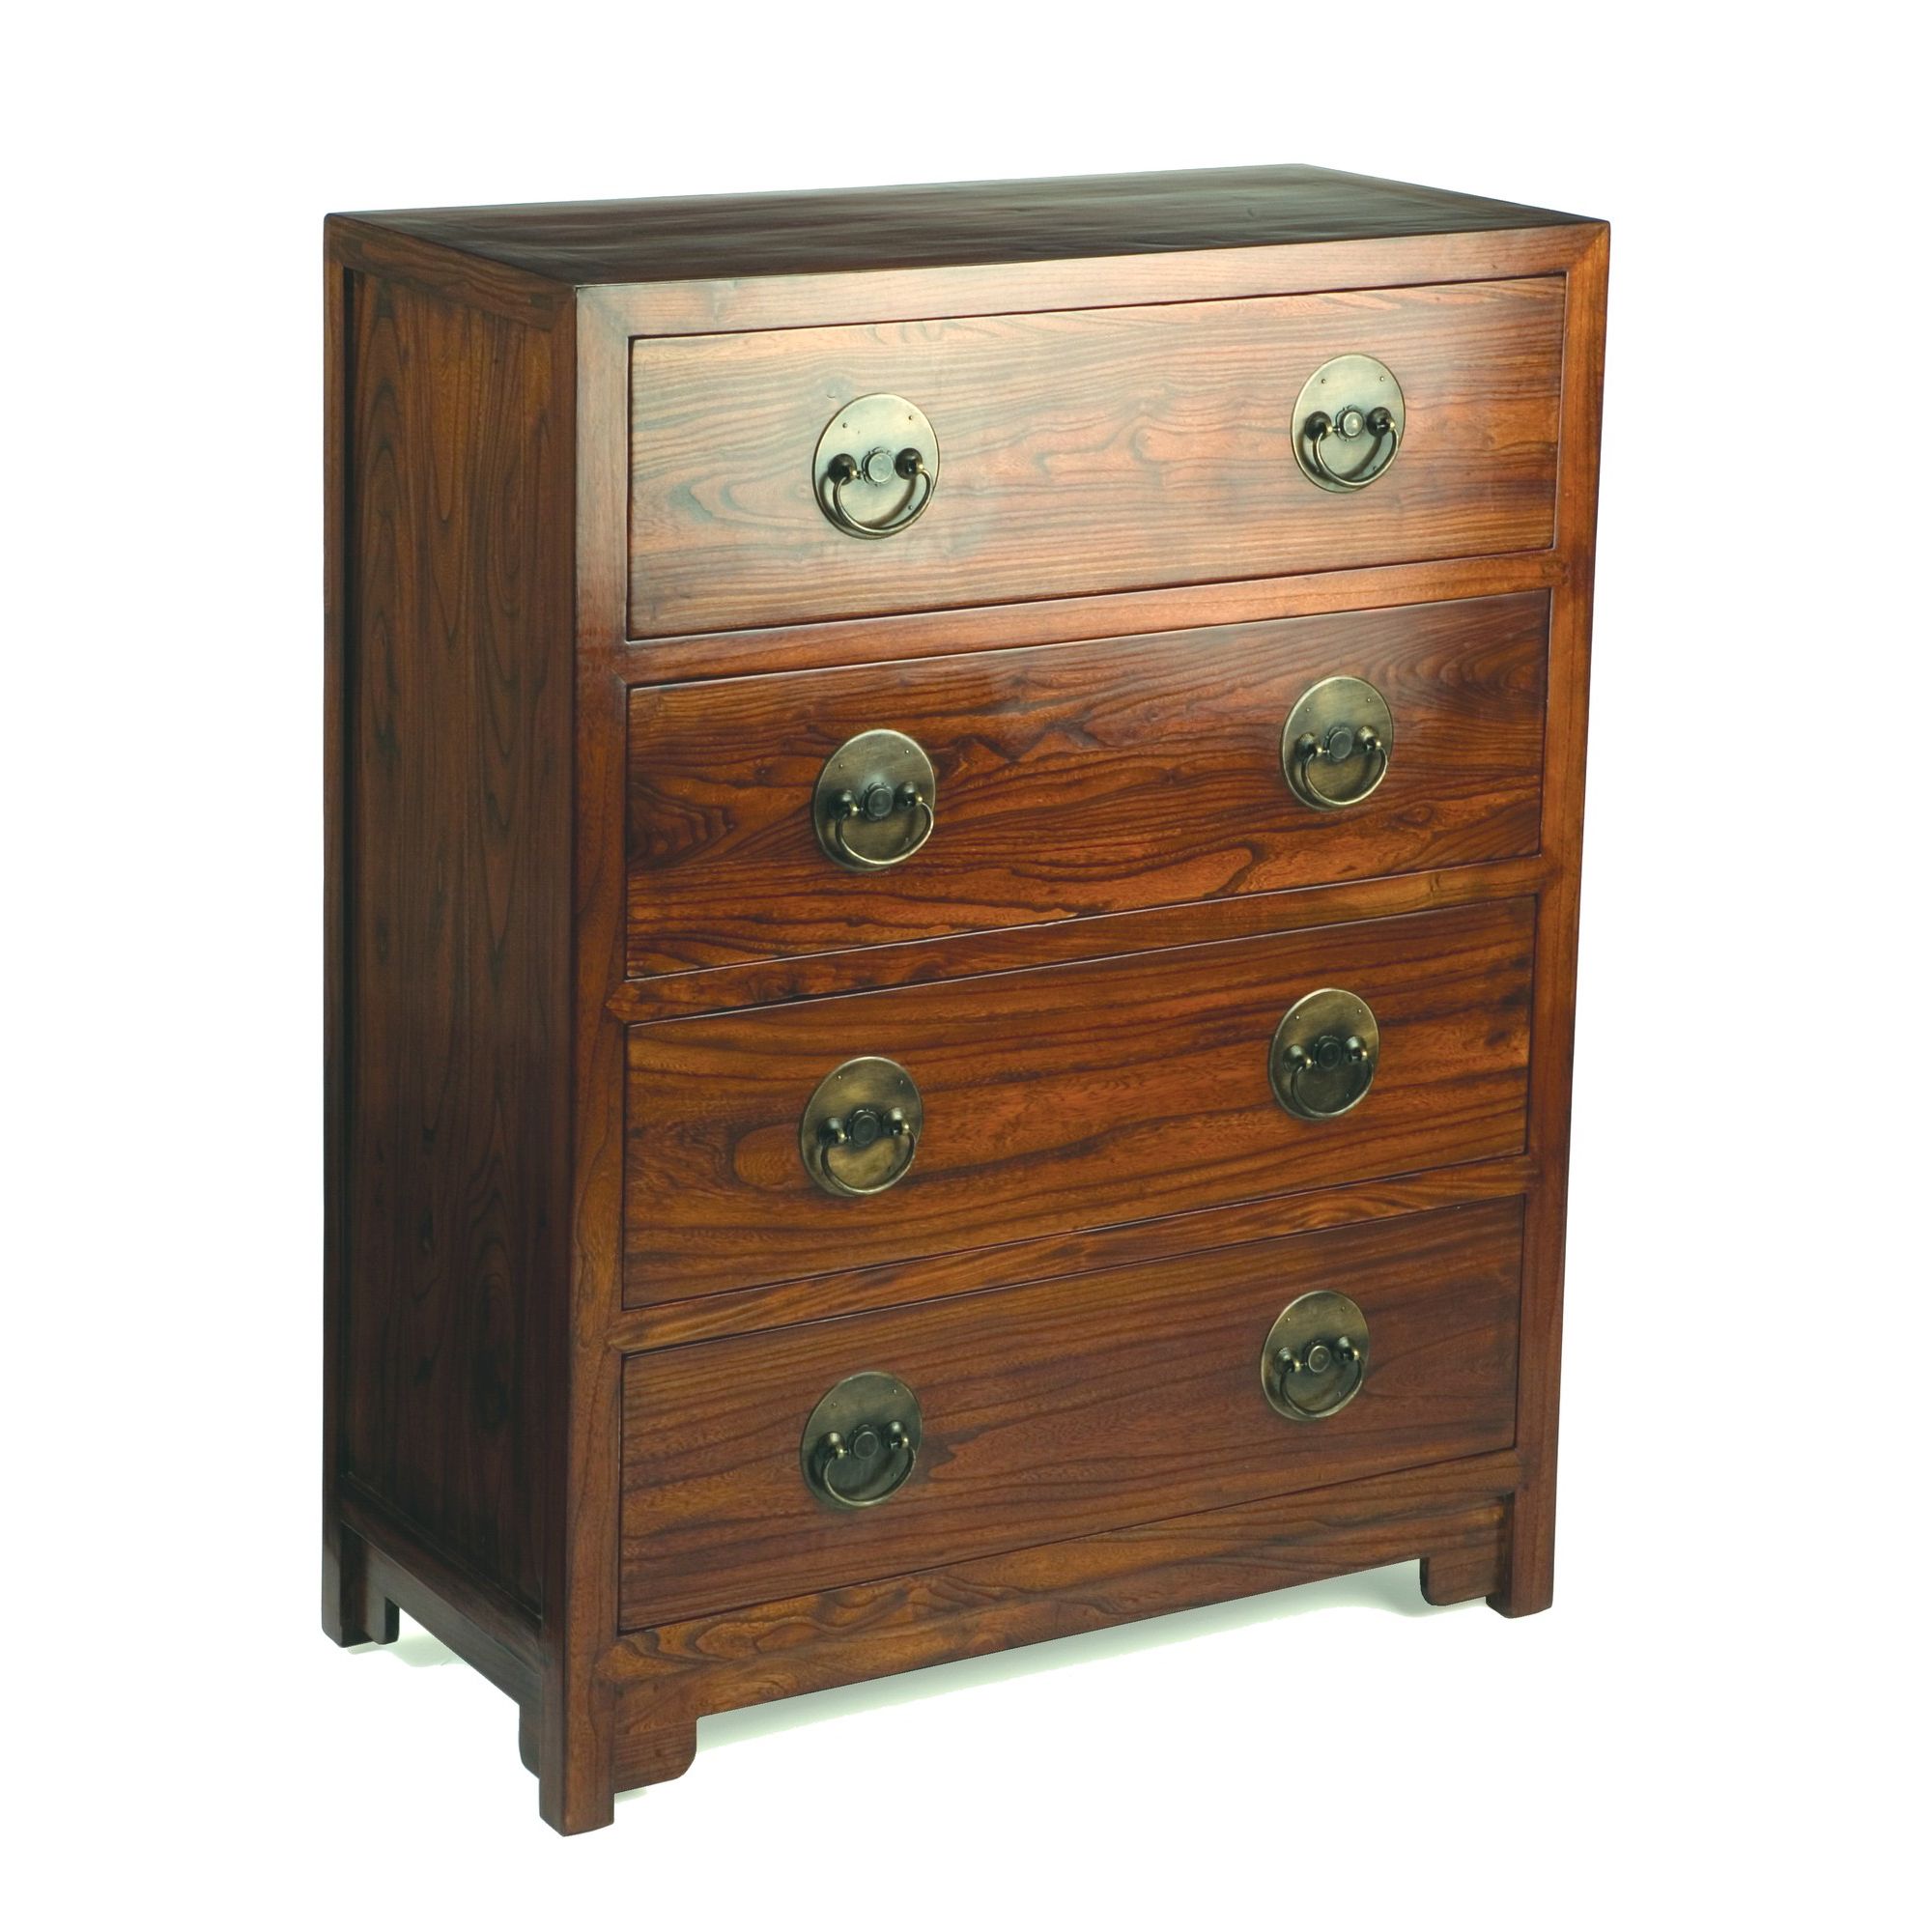 Shimu Chinese Classical Ming Chest of Drawers - Warm Elm at Tesco Direct